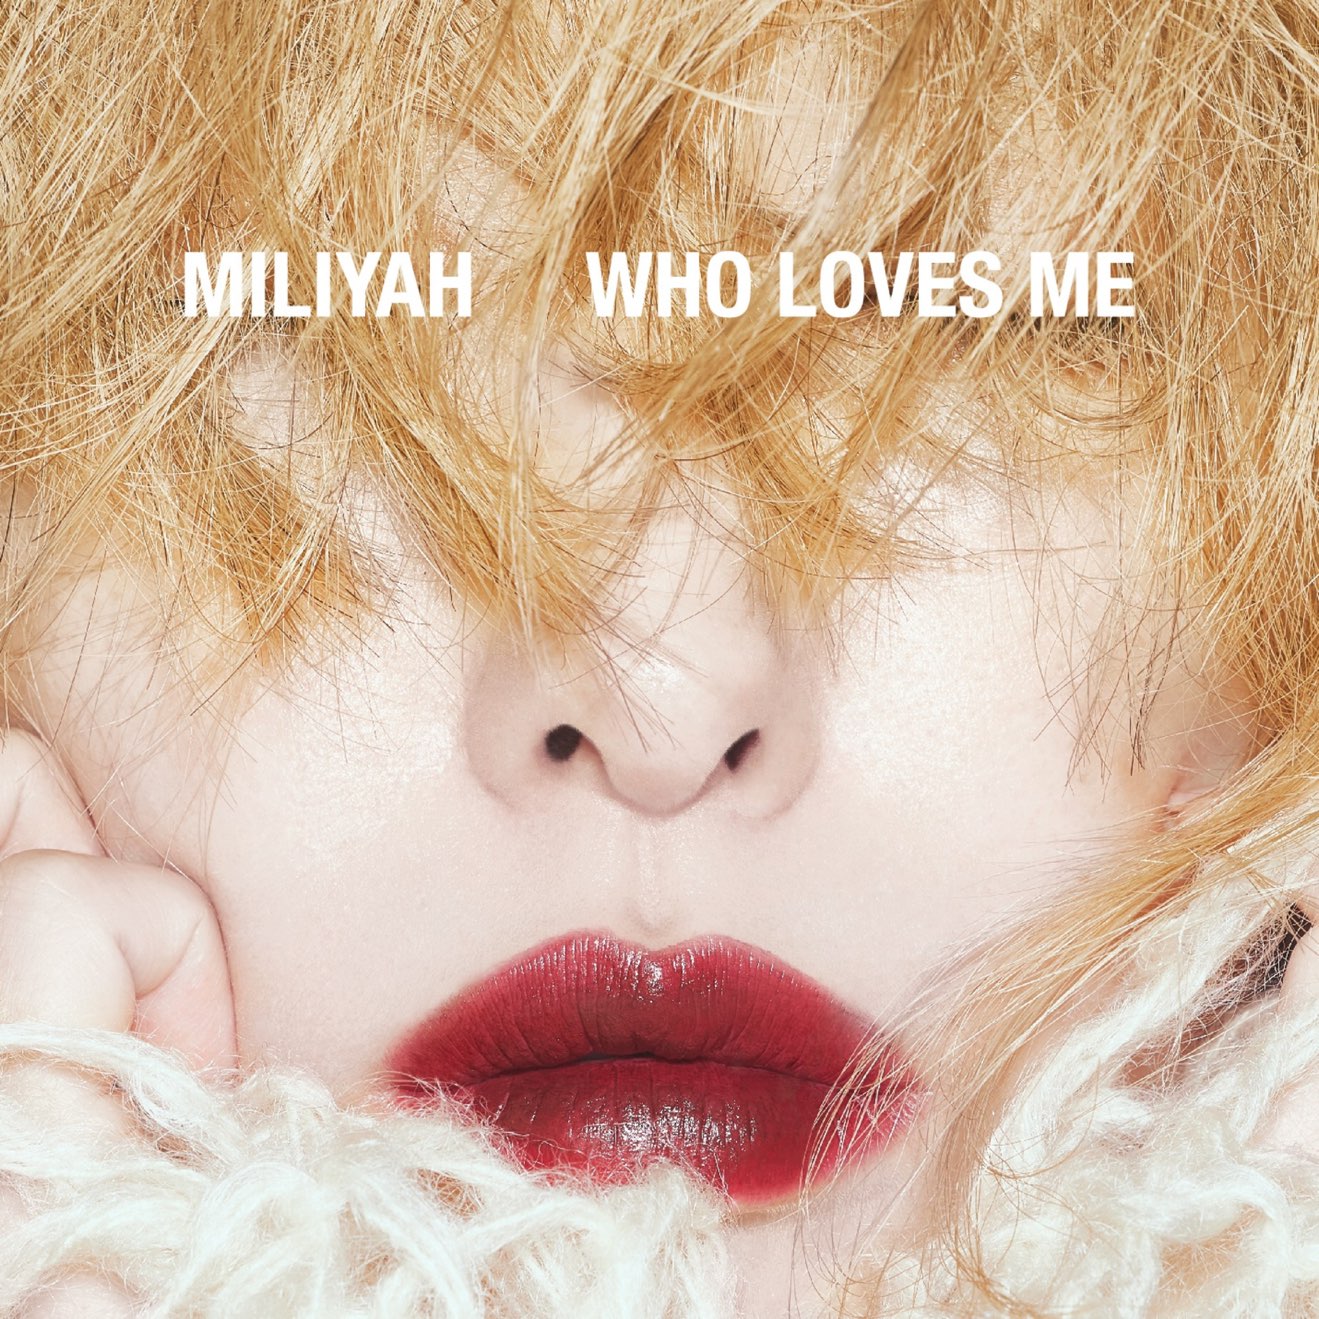 Miliyah – WHO LOVES ME (2021) [iTunes Match M4A]